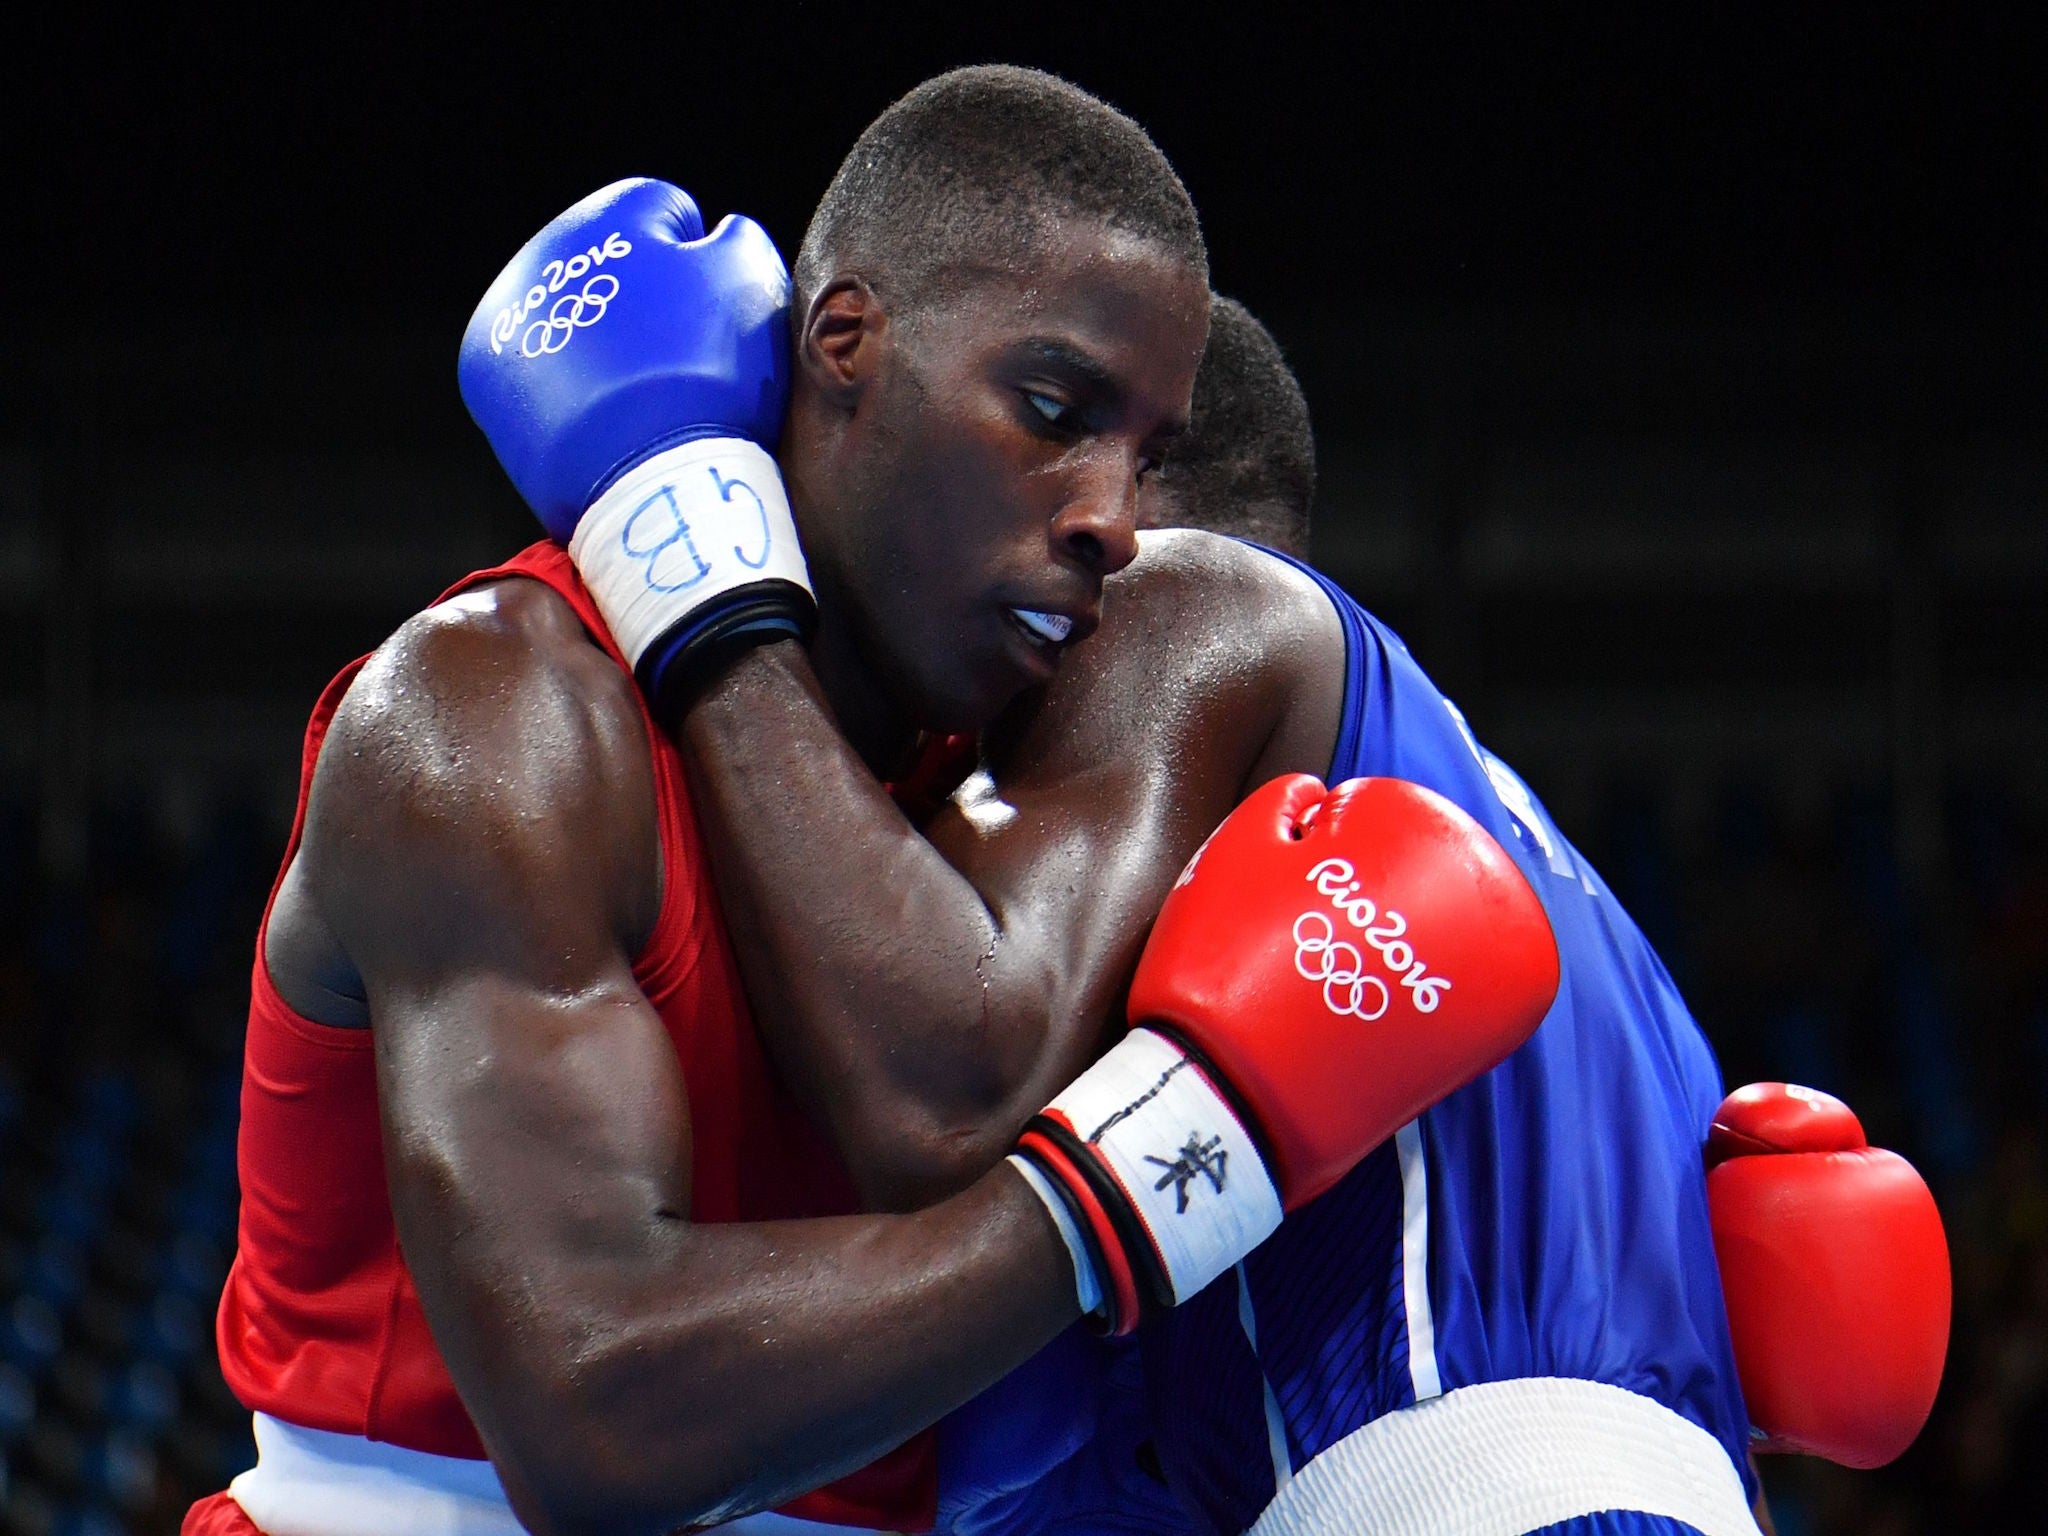 Lawrence Okolie could not recover from a bad start